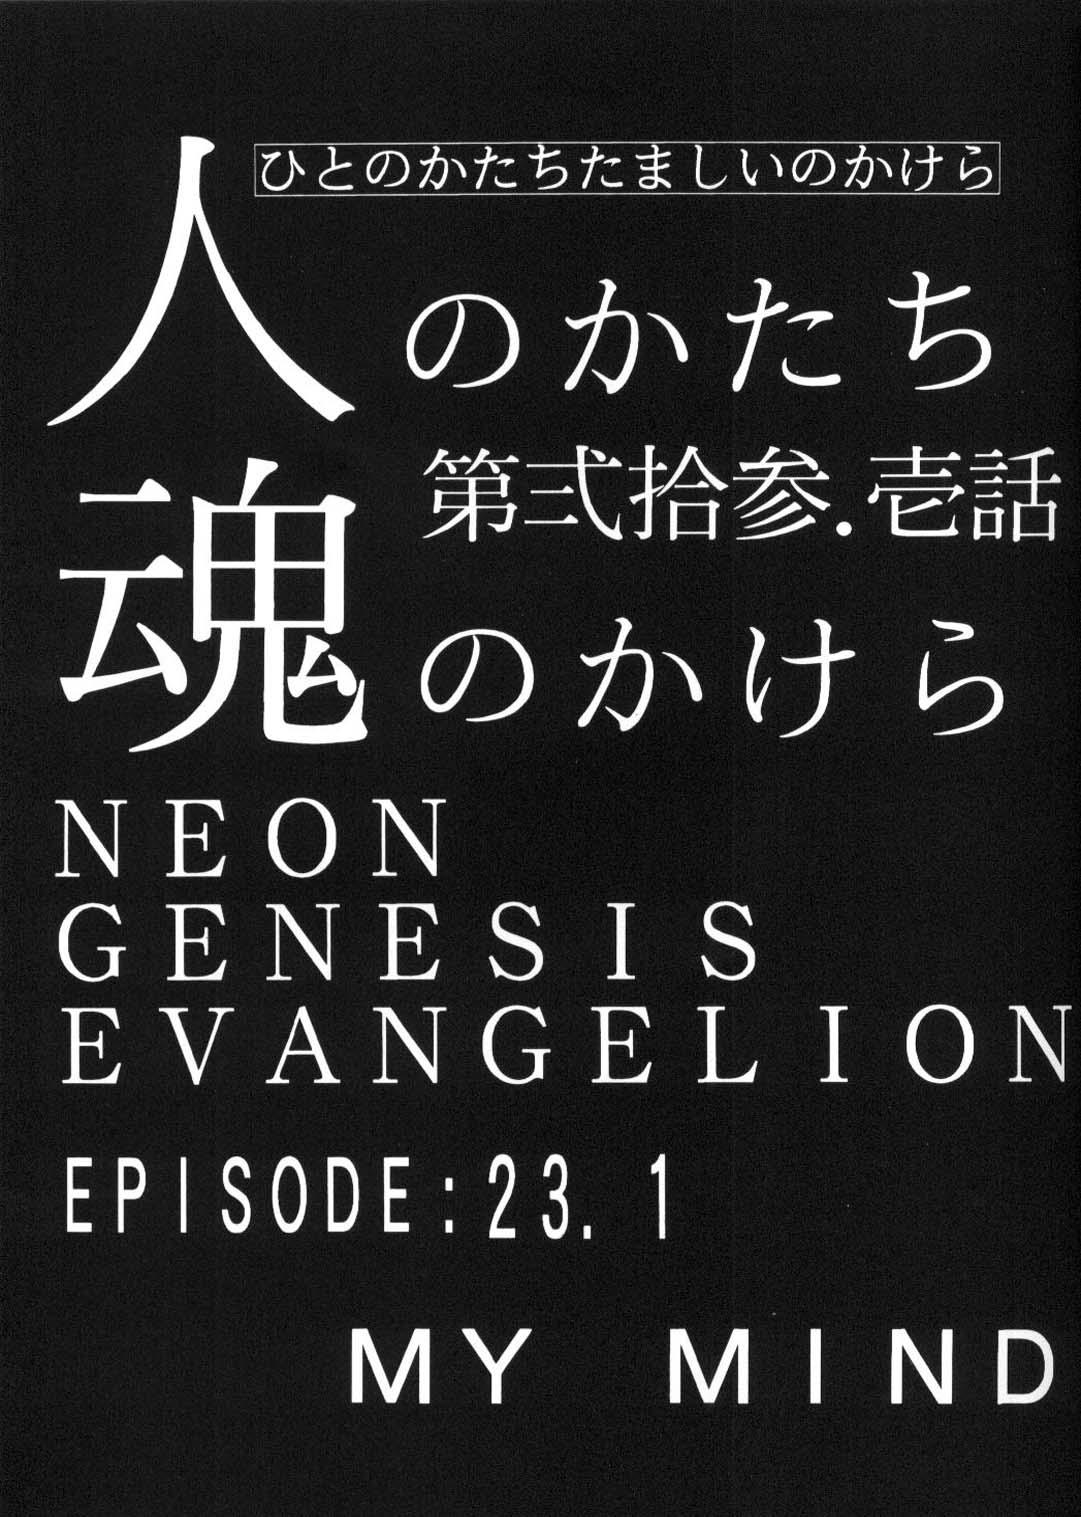 Indonesian Expedia Ver 1.0A - Neon genesis evangelion Piss - Page 4